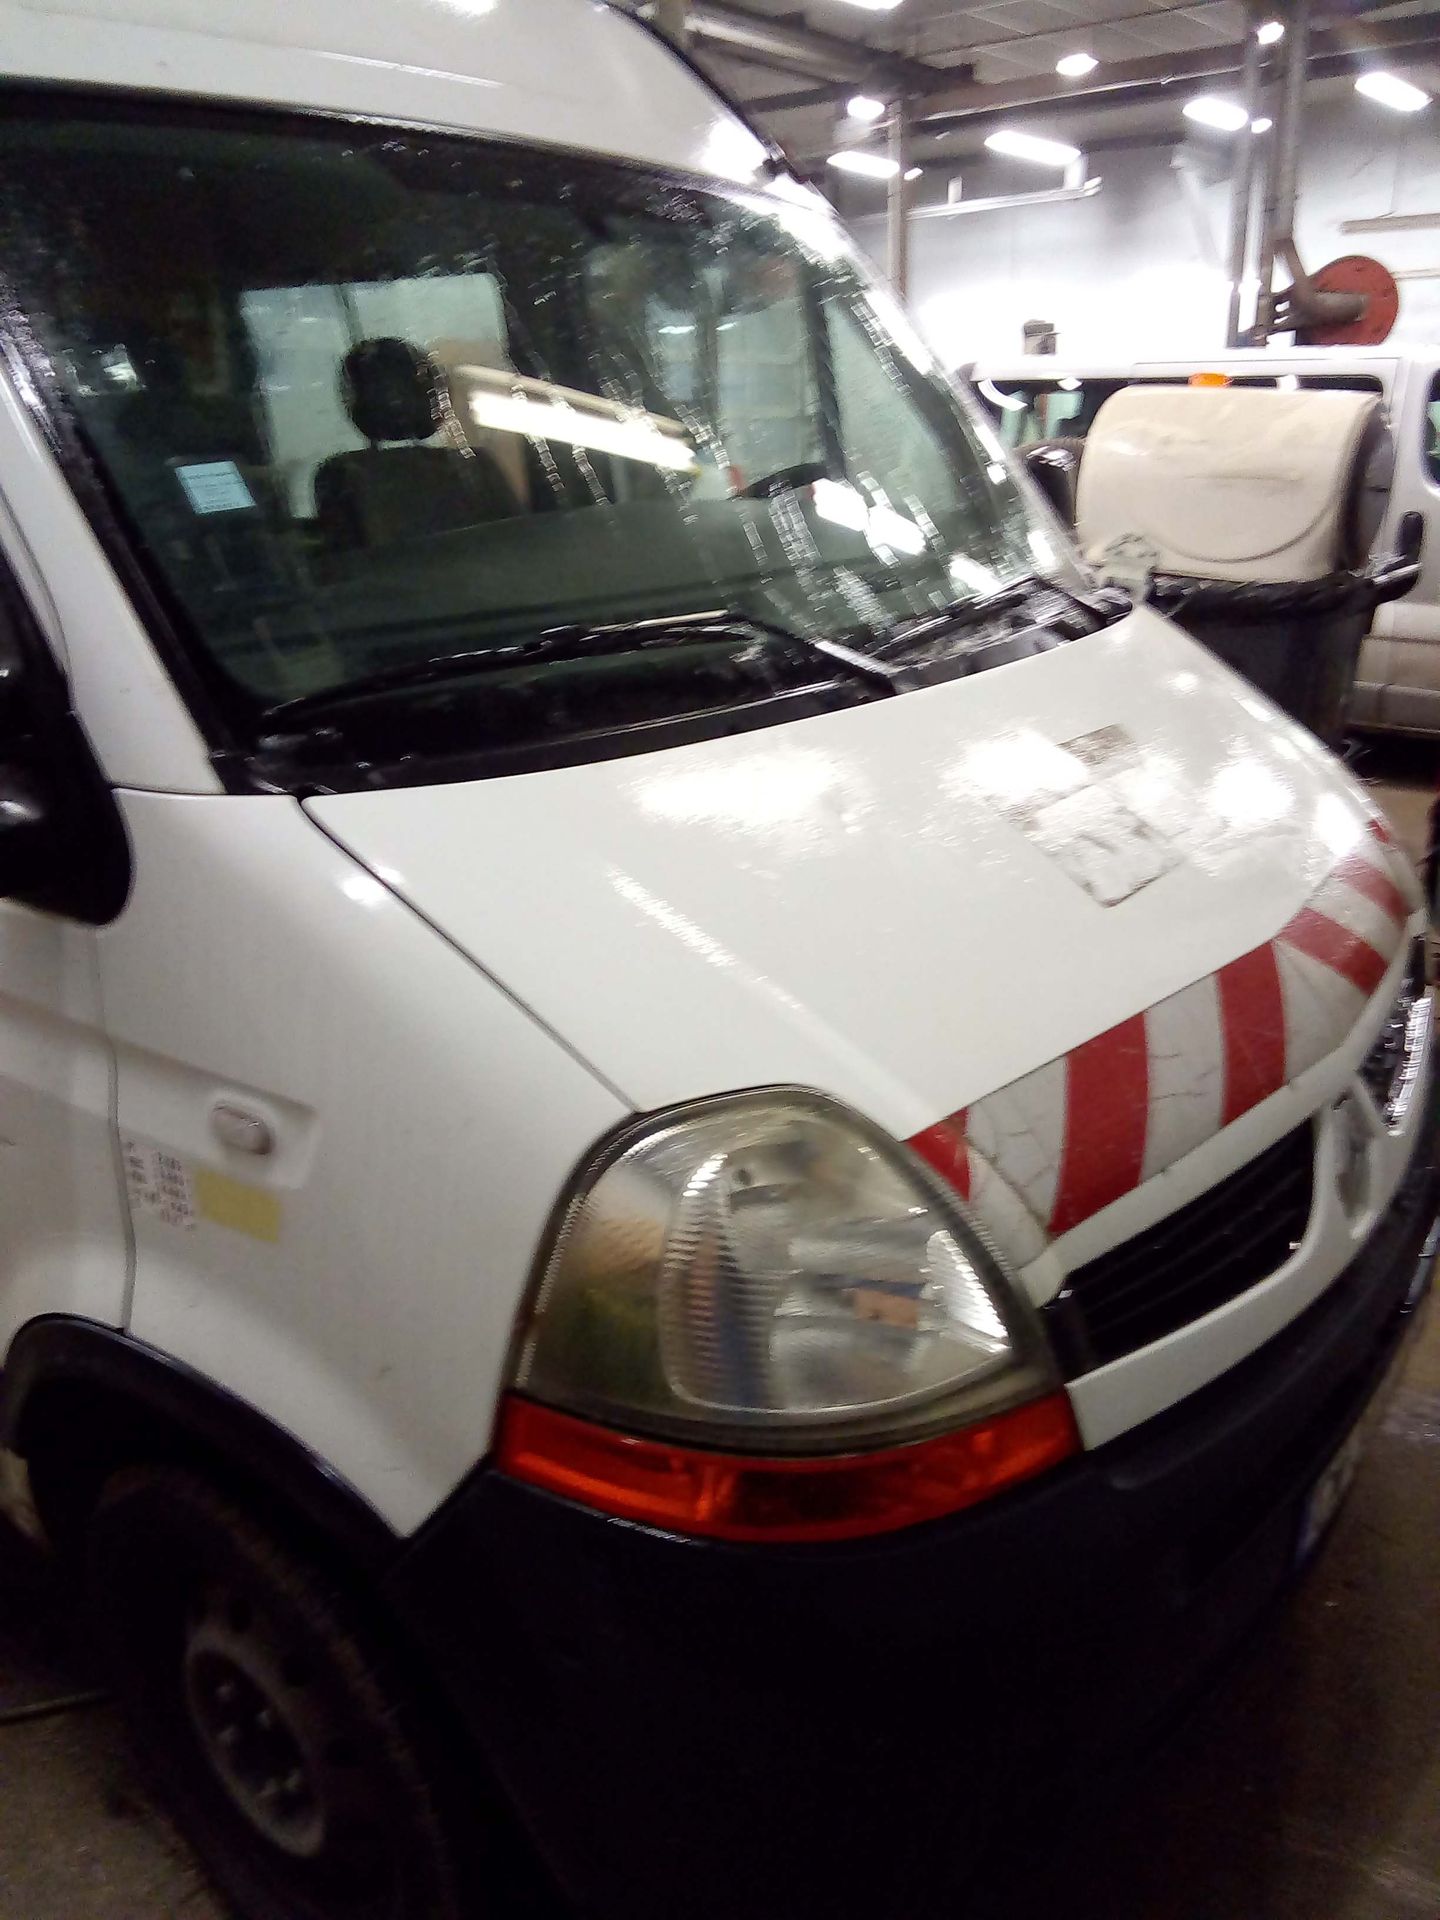 Null [CT] Utilitaire RENAULT MASTER II fourgon 2.5 dCi L2H2 100, Gazole, récepti&hellip;